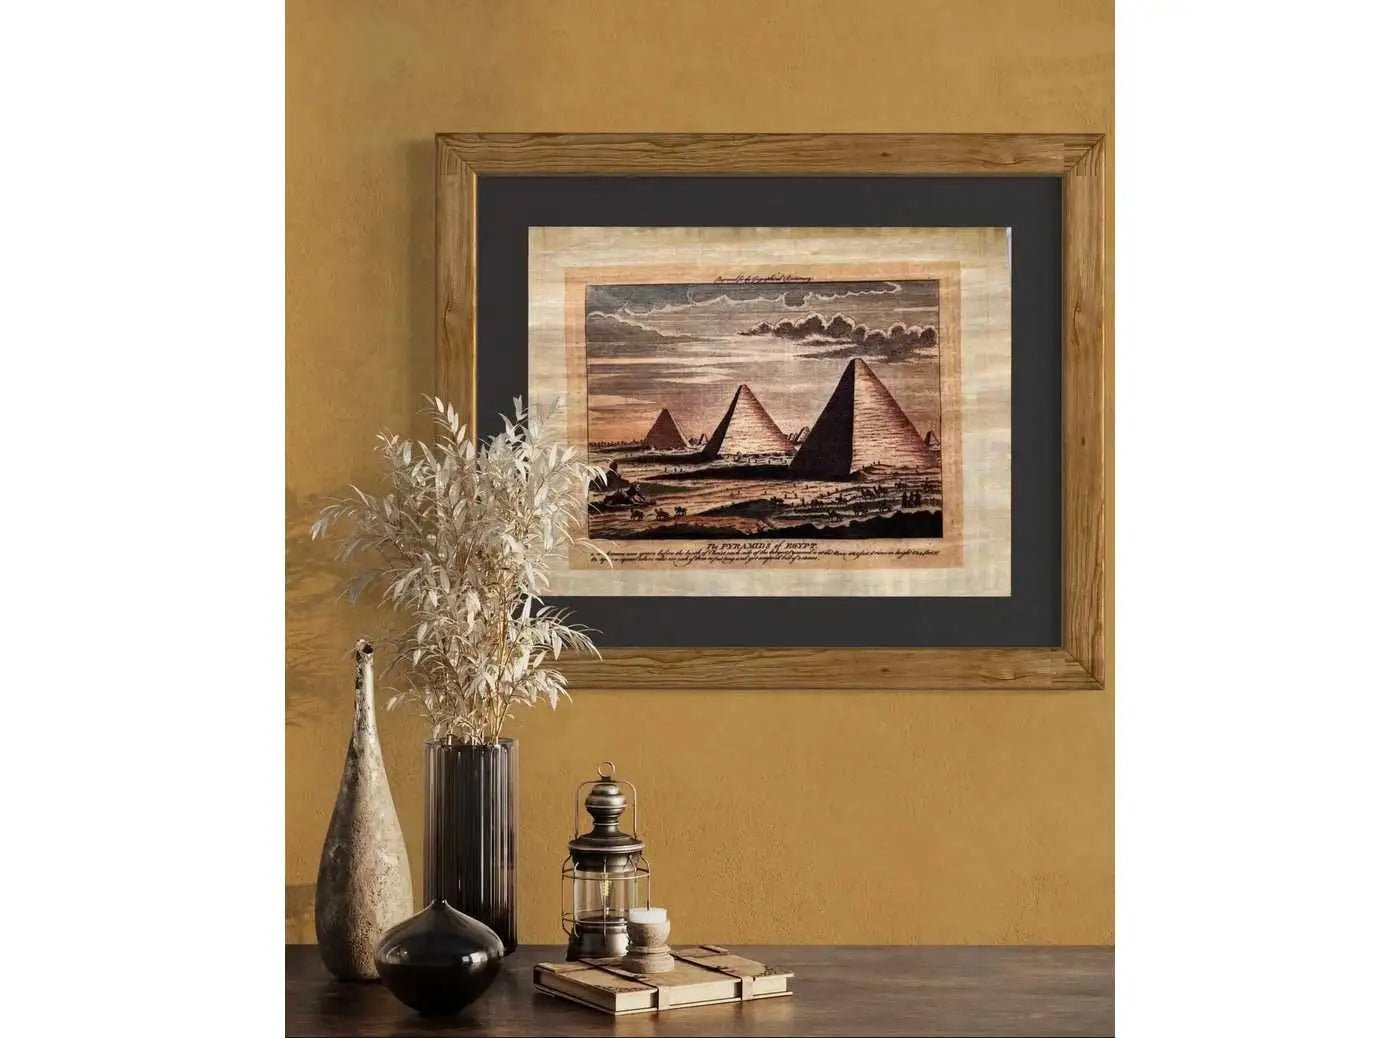 Egyptian Pyramids Printing - Giza Pyramid, Seven Wonders of The World on Authentic Papyrus - Office & Home Decor Wall Art